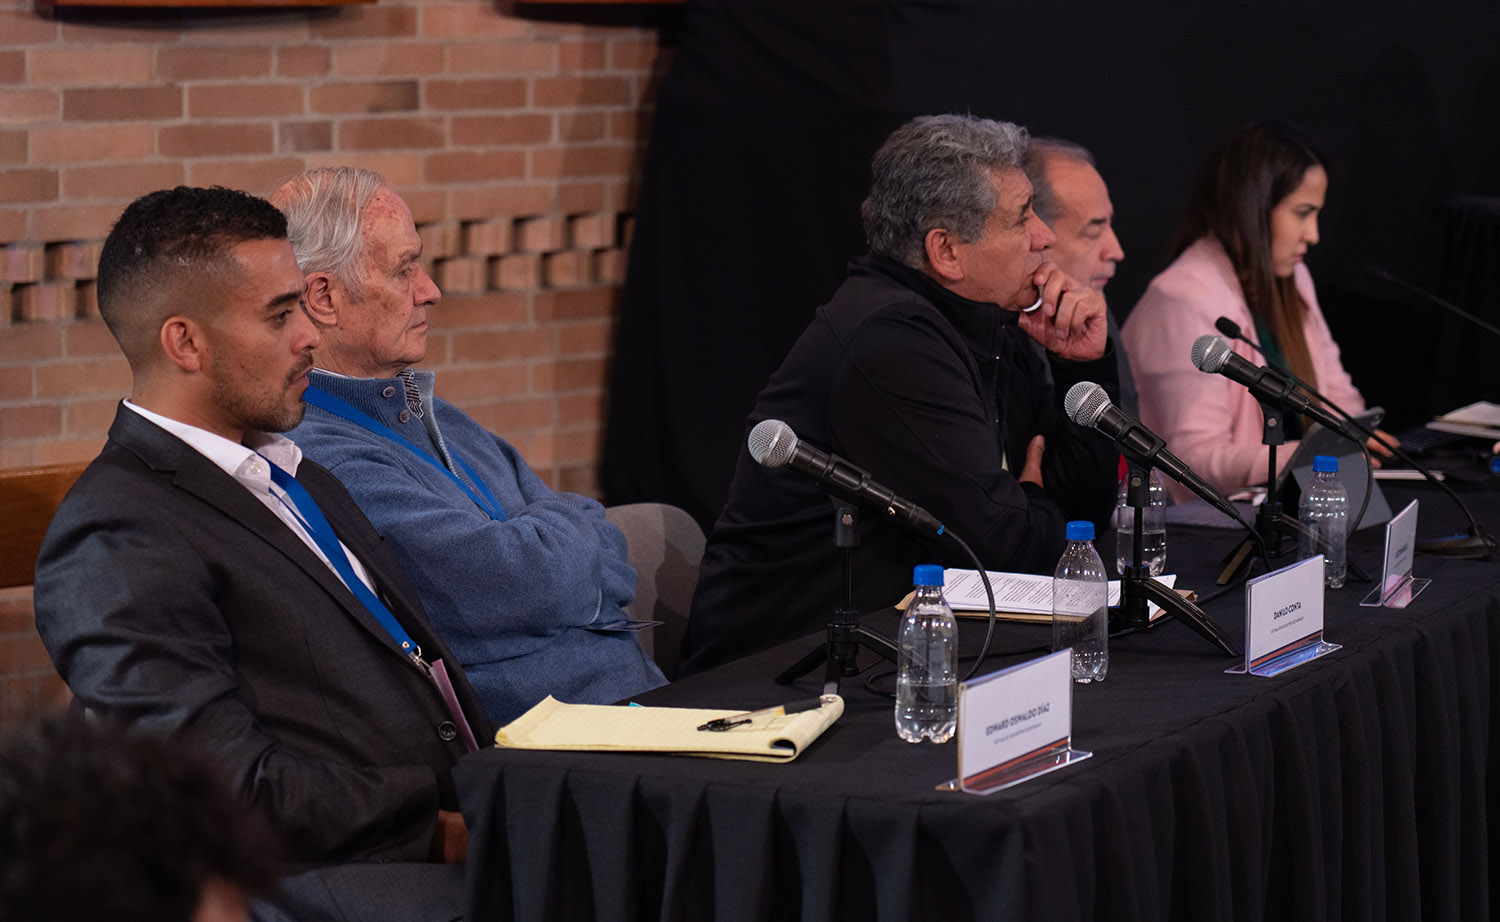 Five people sit at a table with microphones and papers in front of them facing the right hand side, listening.